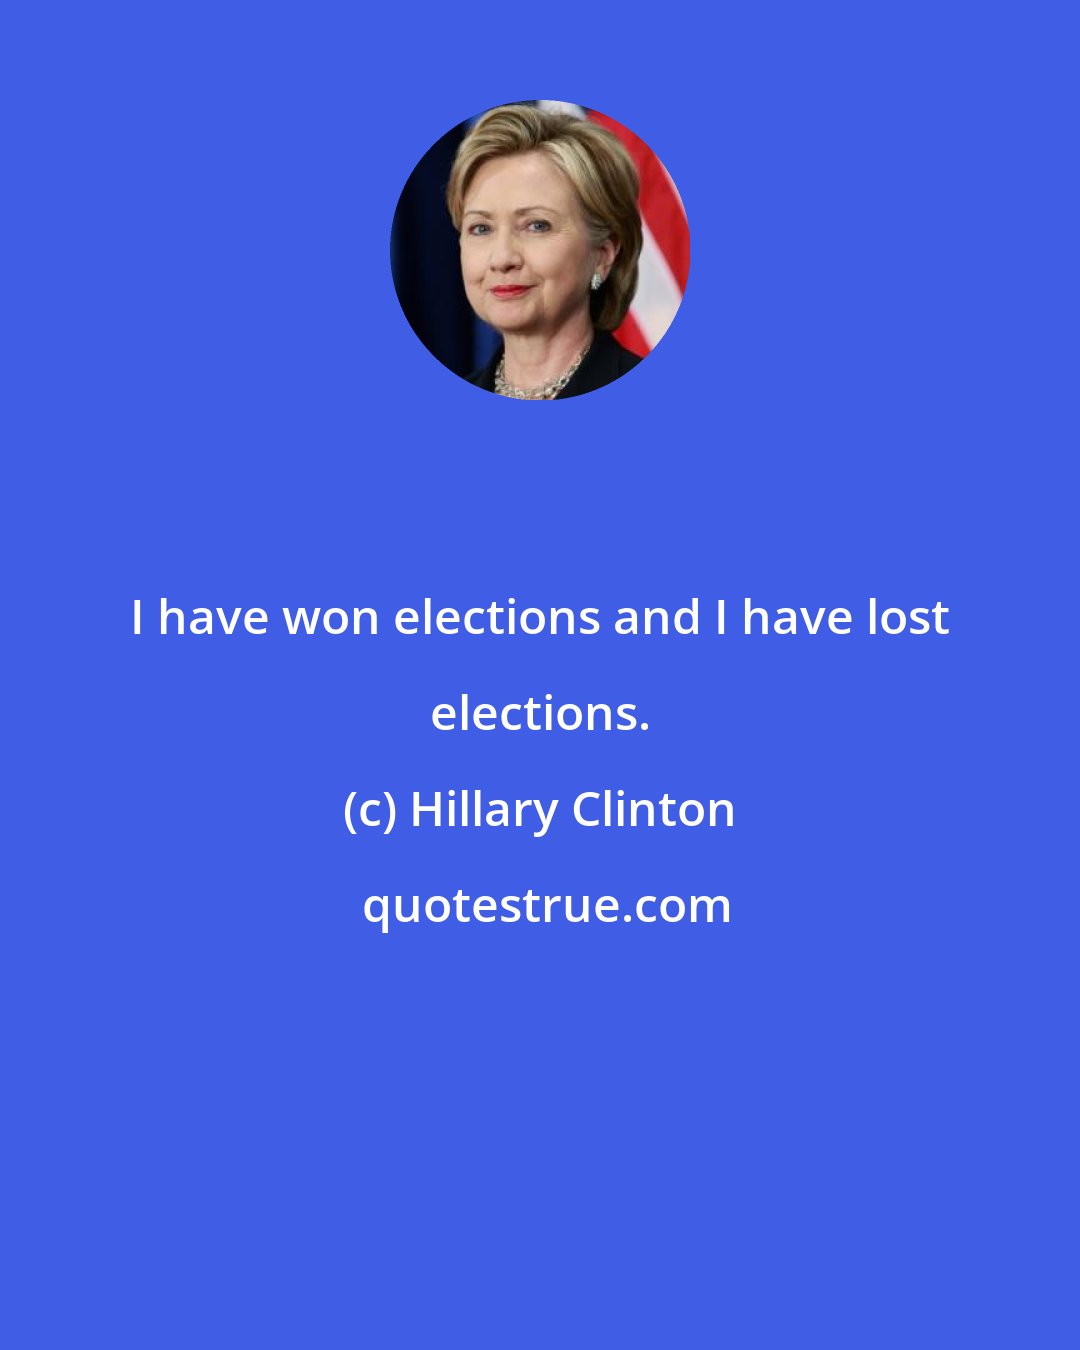 Hillary Clinton: I have won elections and I have lost elections.